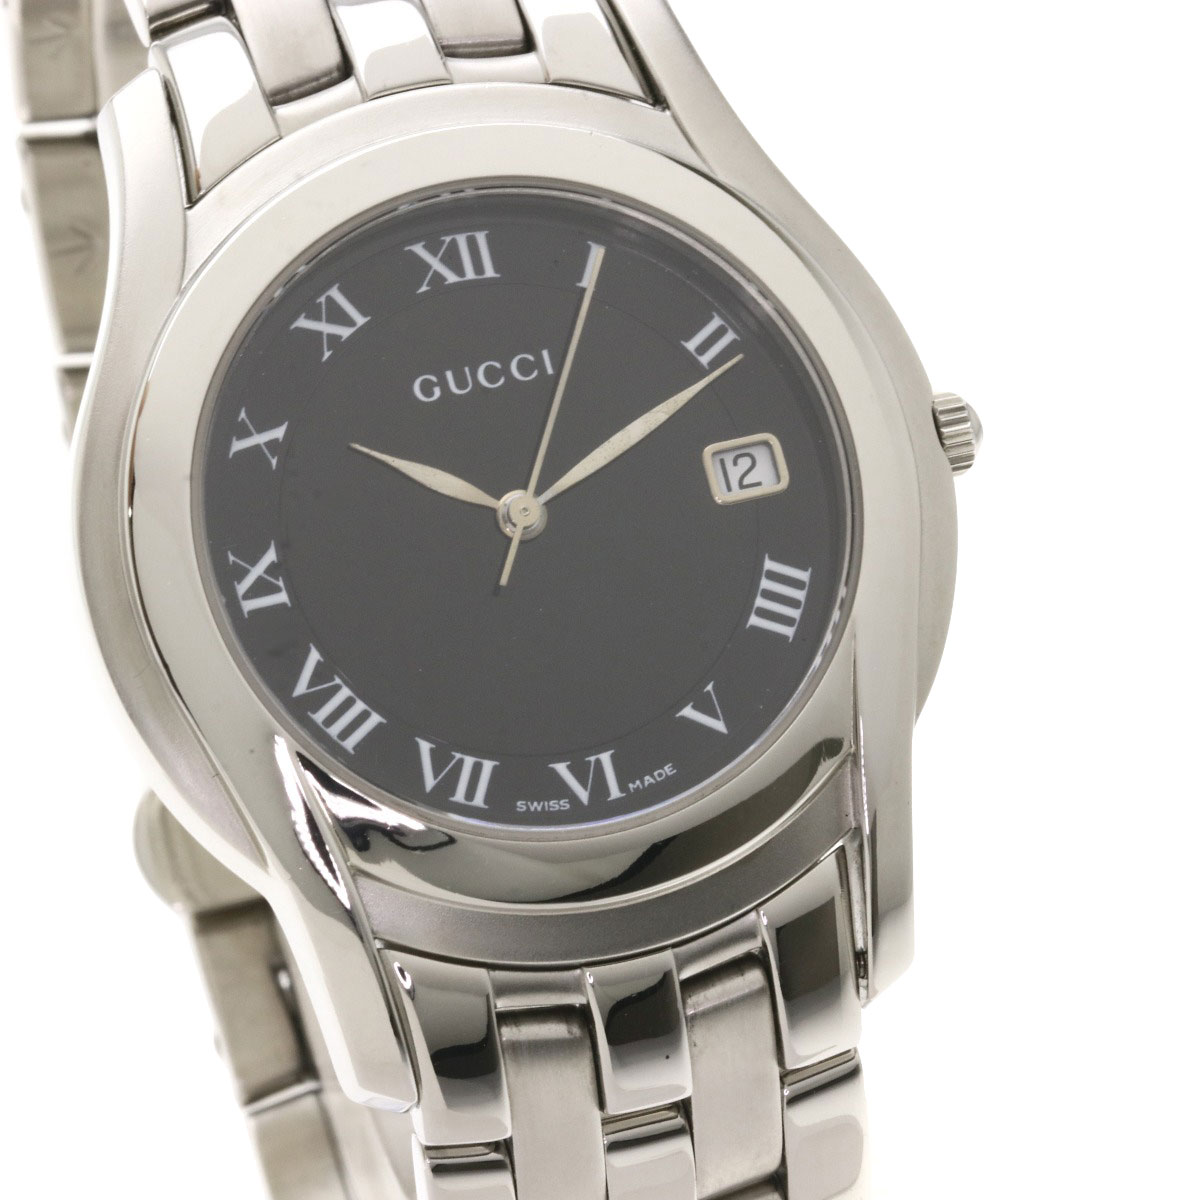 GUCCI Round face Watches 5500M Stainless Steel/Stainless Steel mens | eBay